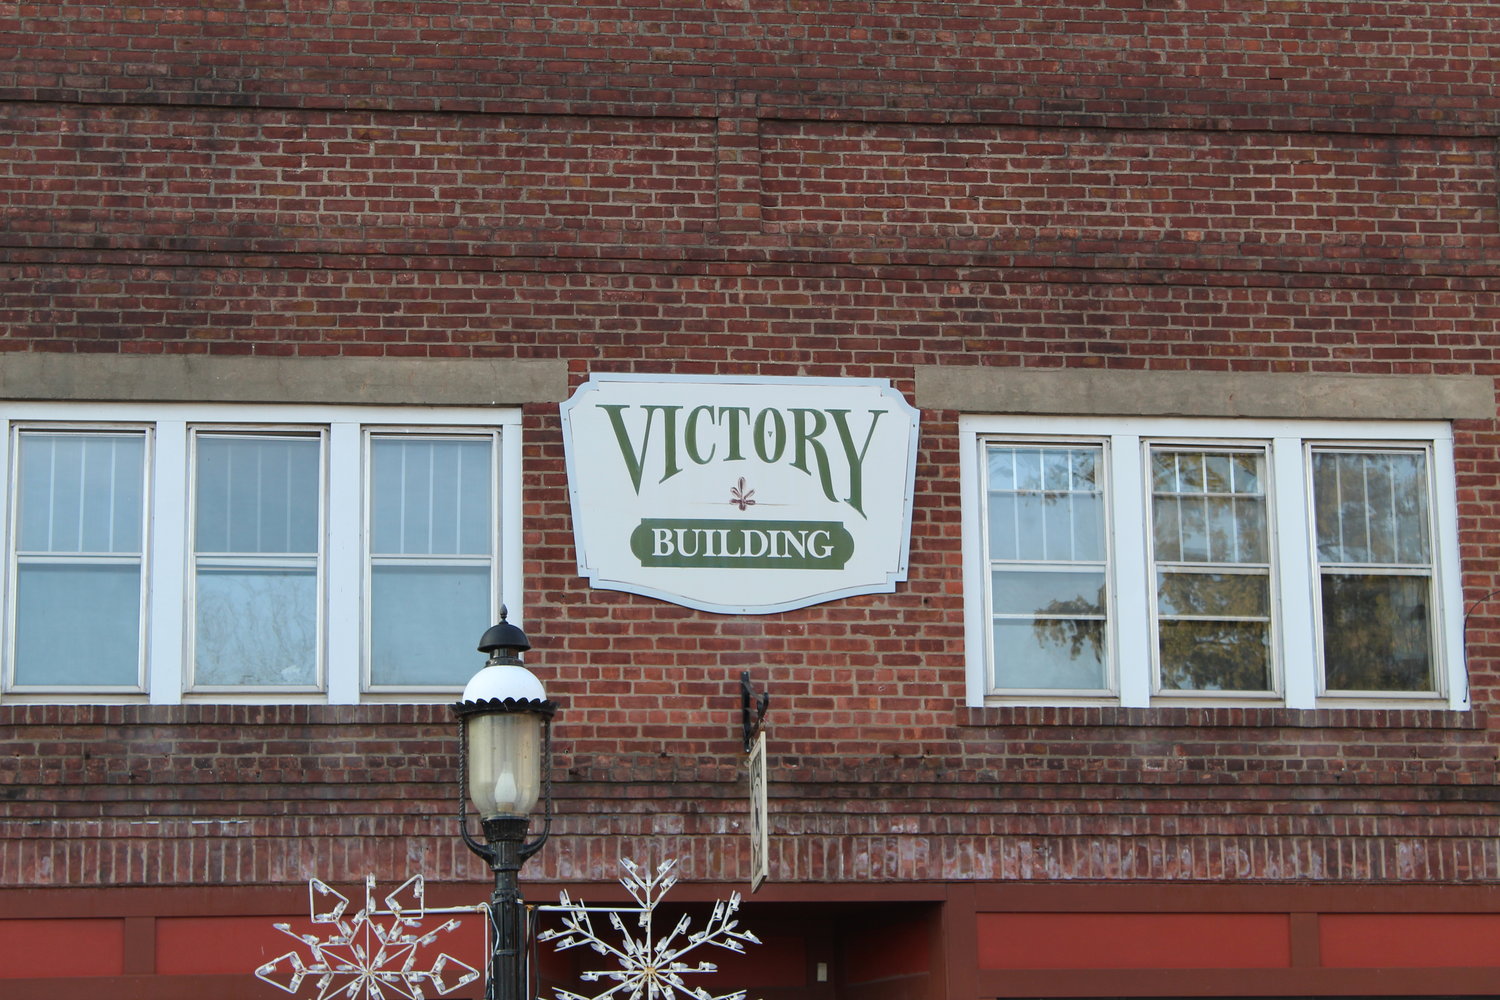 The Victory Building in Roscoe, just one of many historic shops, churches and homes in the two communities.